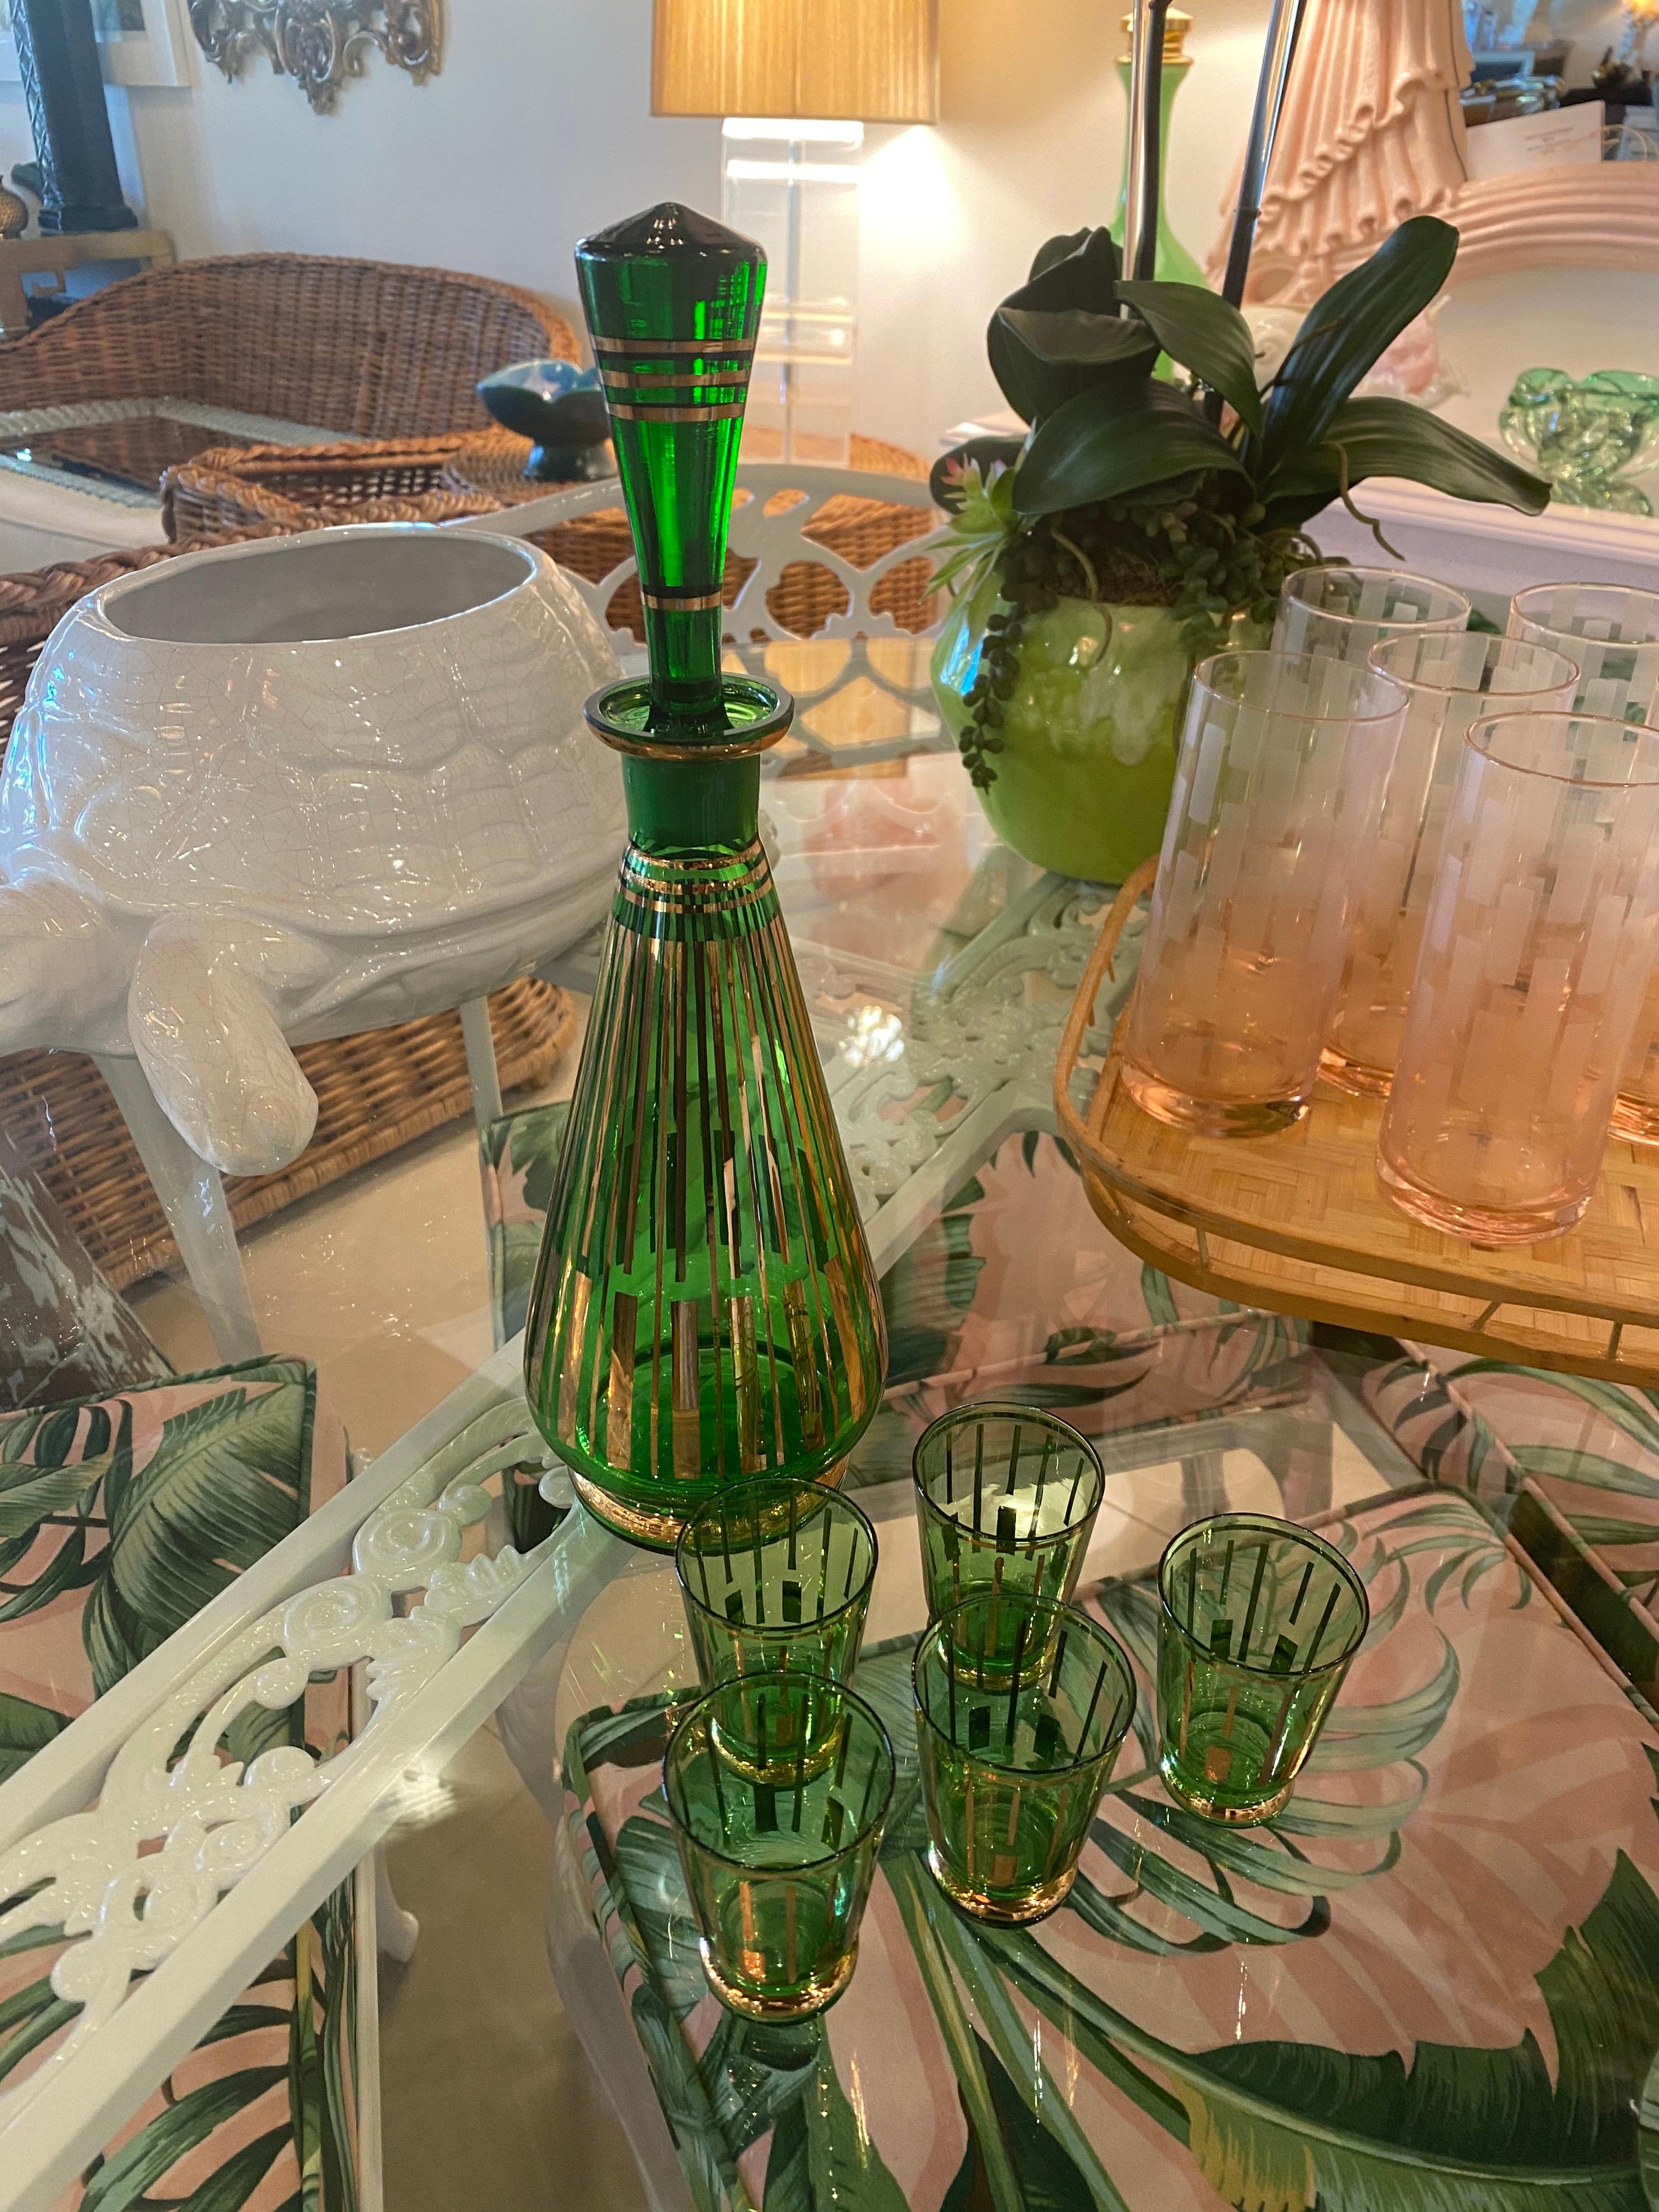 Beautiful vintage 1950s green and gold glass decanter drinking set. Includes decanter with glass stopper and 5 shot glasses. No chips or breaks. Beautiful green color! 
Decanter 12.5 H x 3.5 D
Glasses 2.5 H.